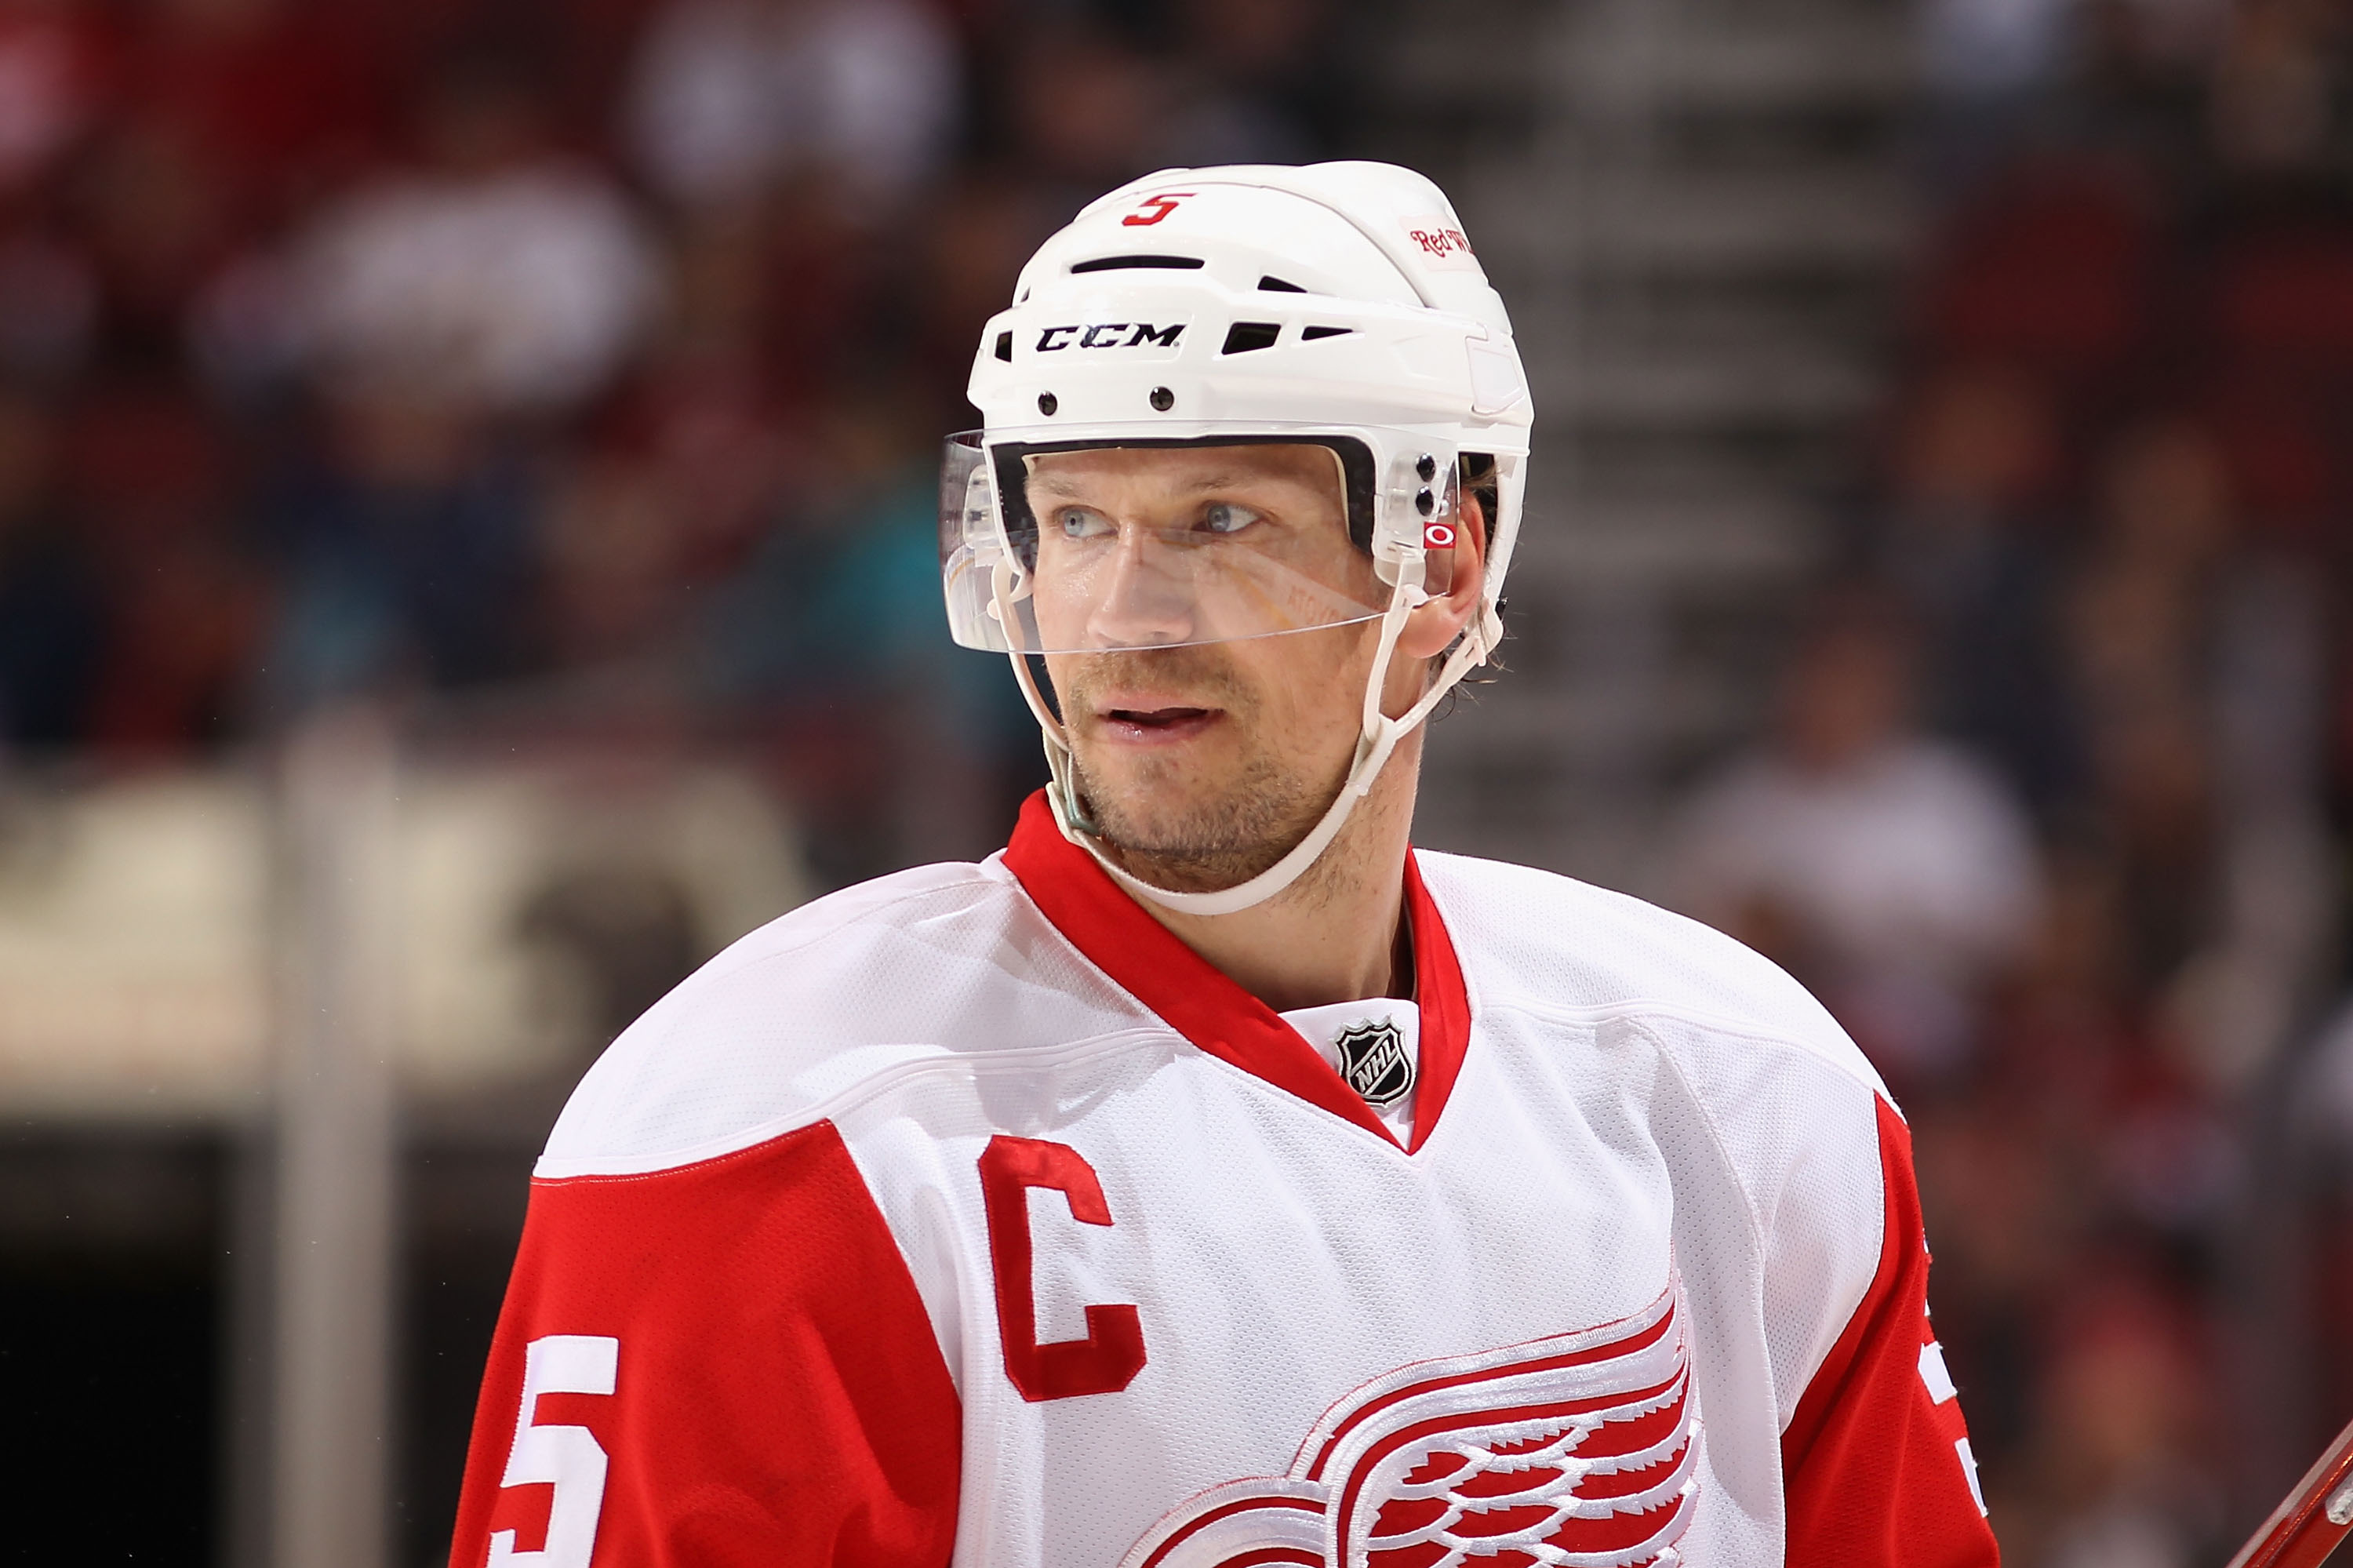 Nicklas Lidstrom Action Detroit Red Wings NHL Hockey Action